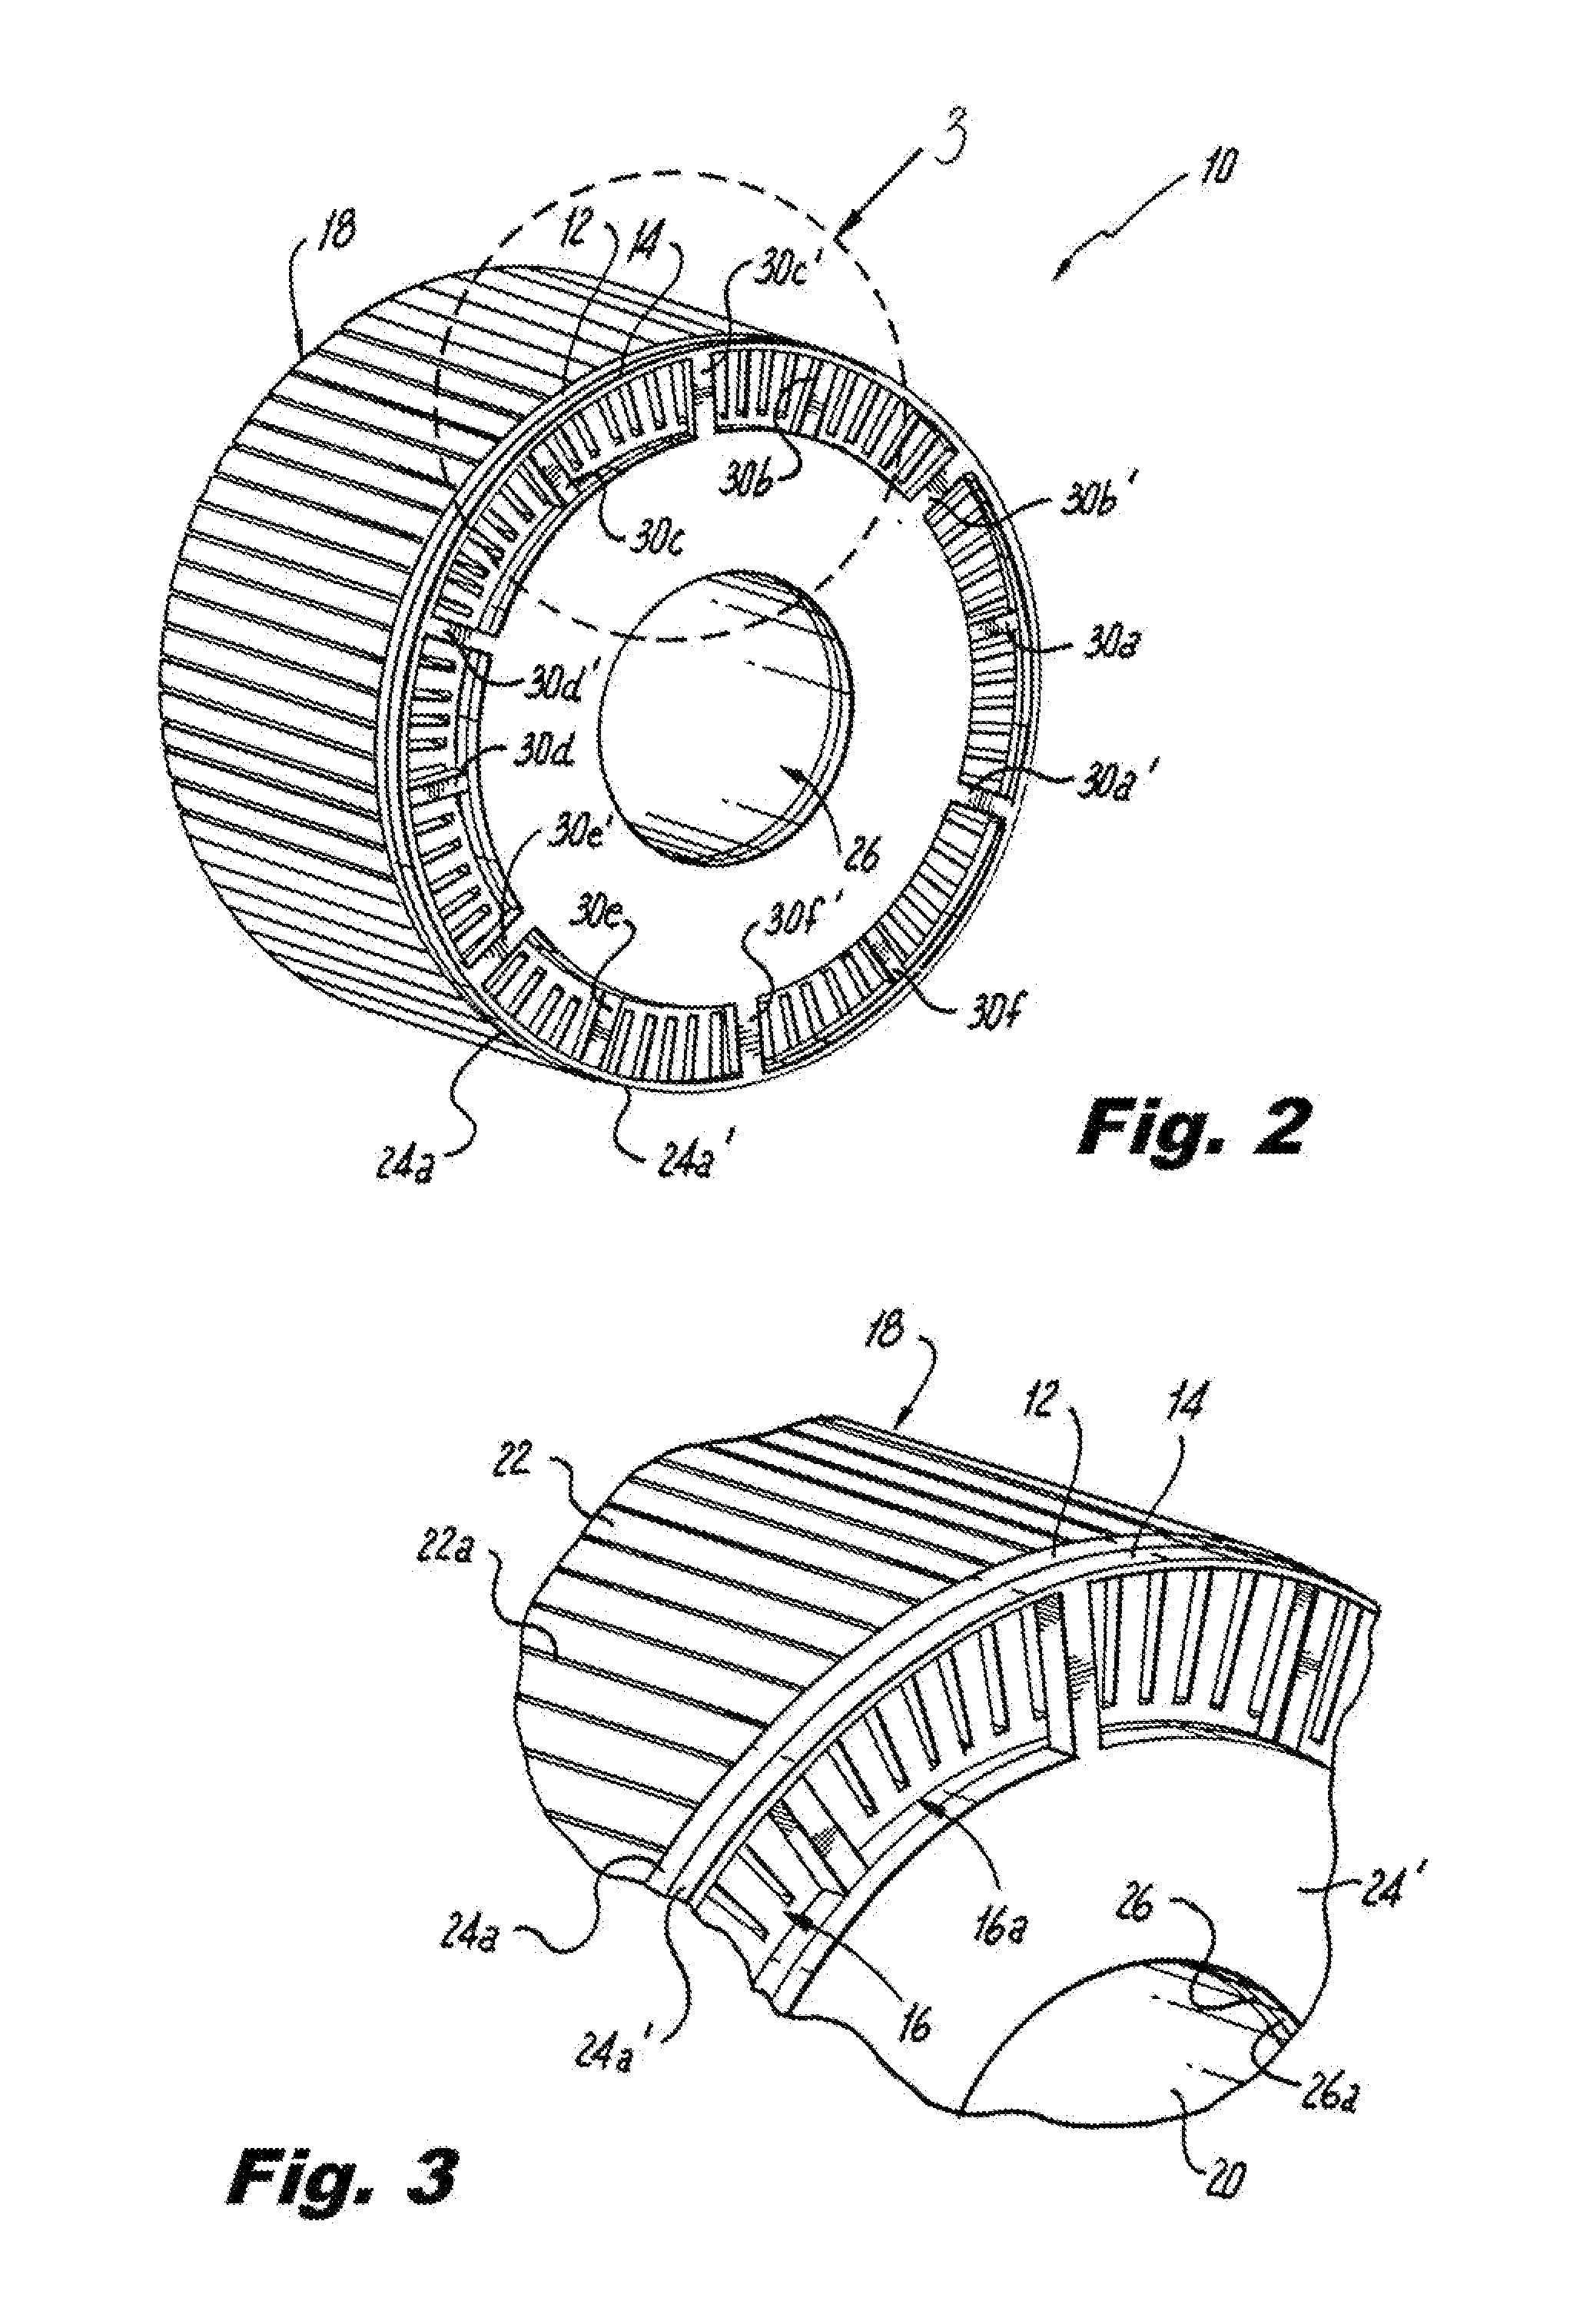 Die Cast Rotor With Steel End Rings to Contain Aluminum